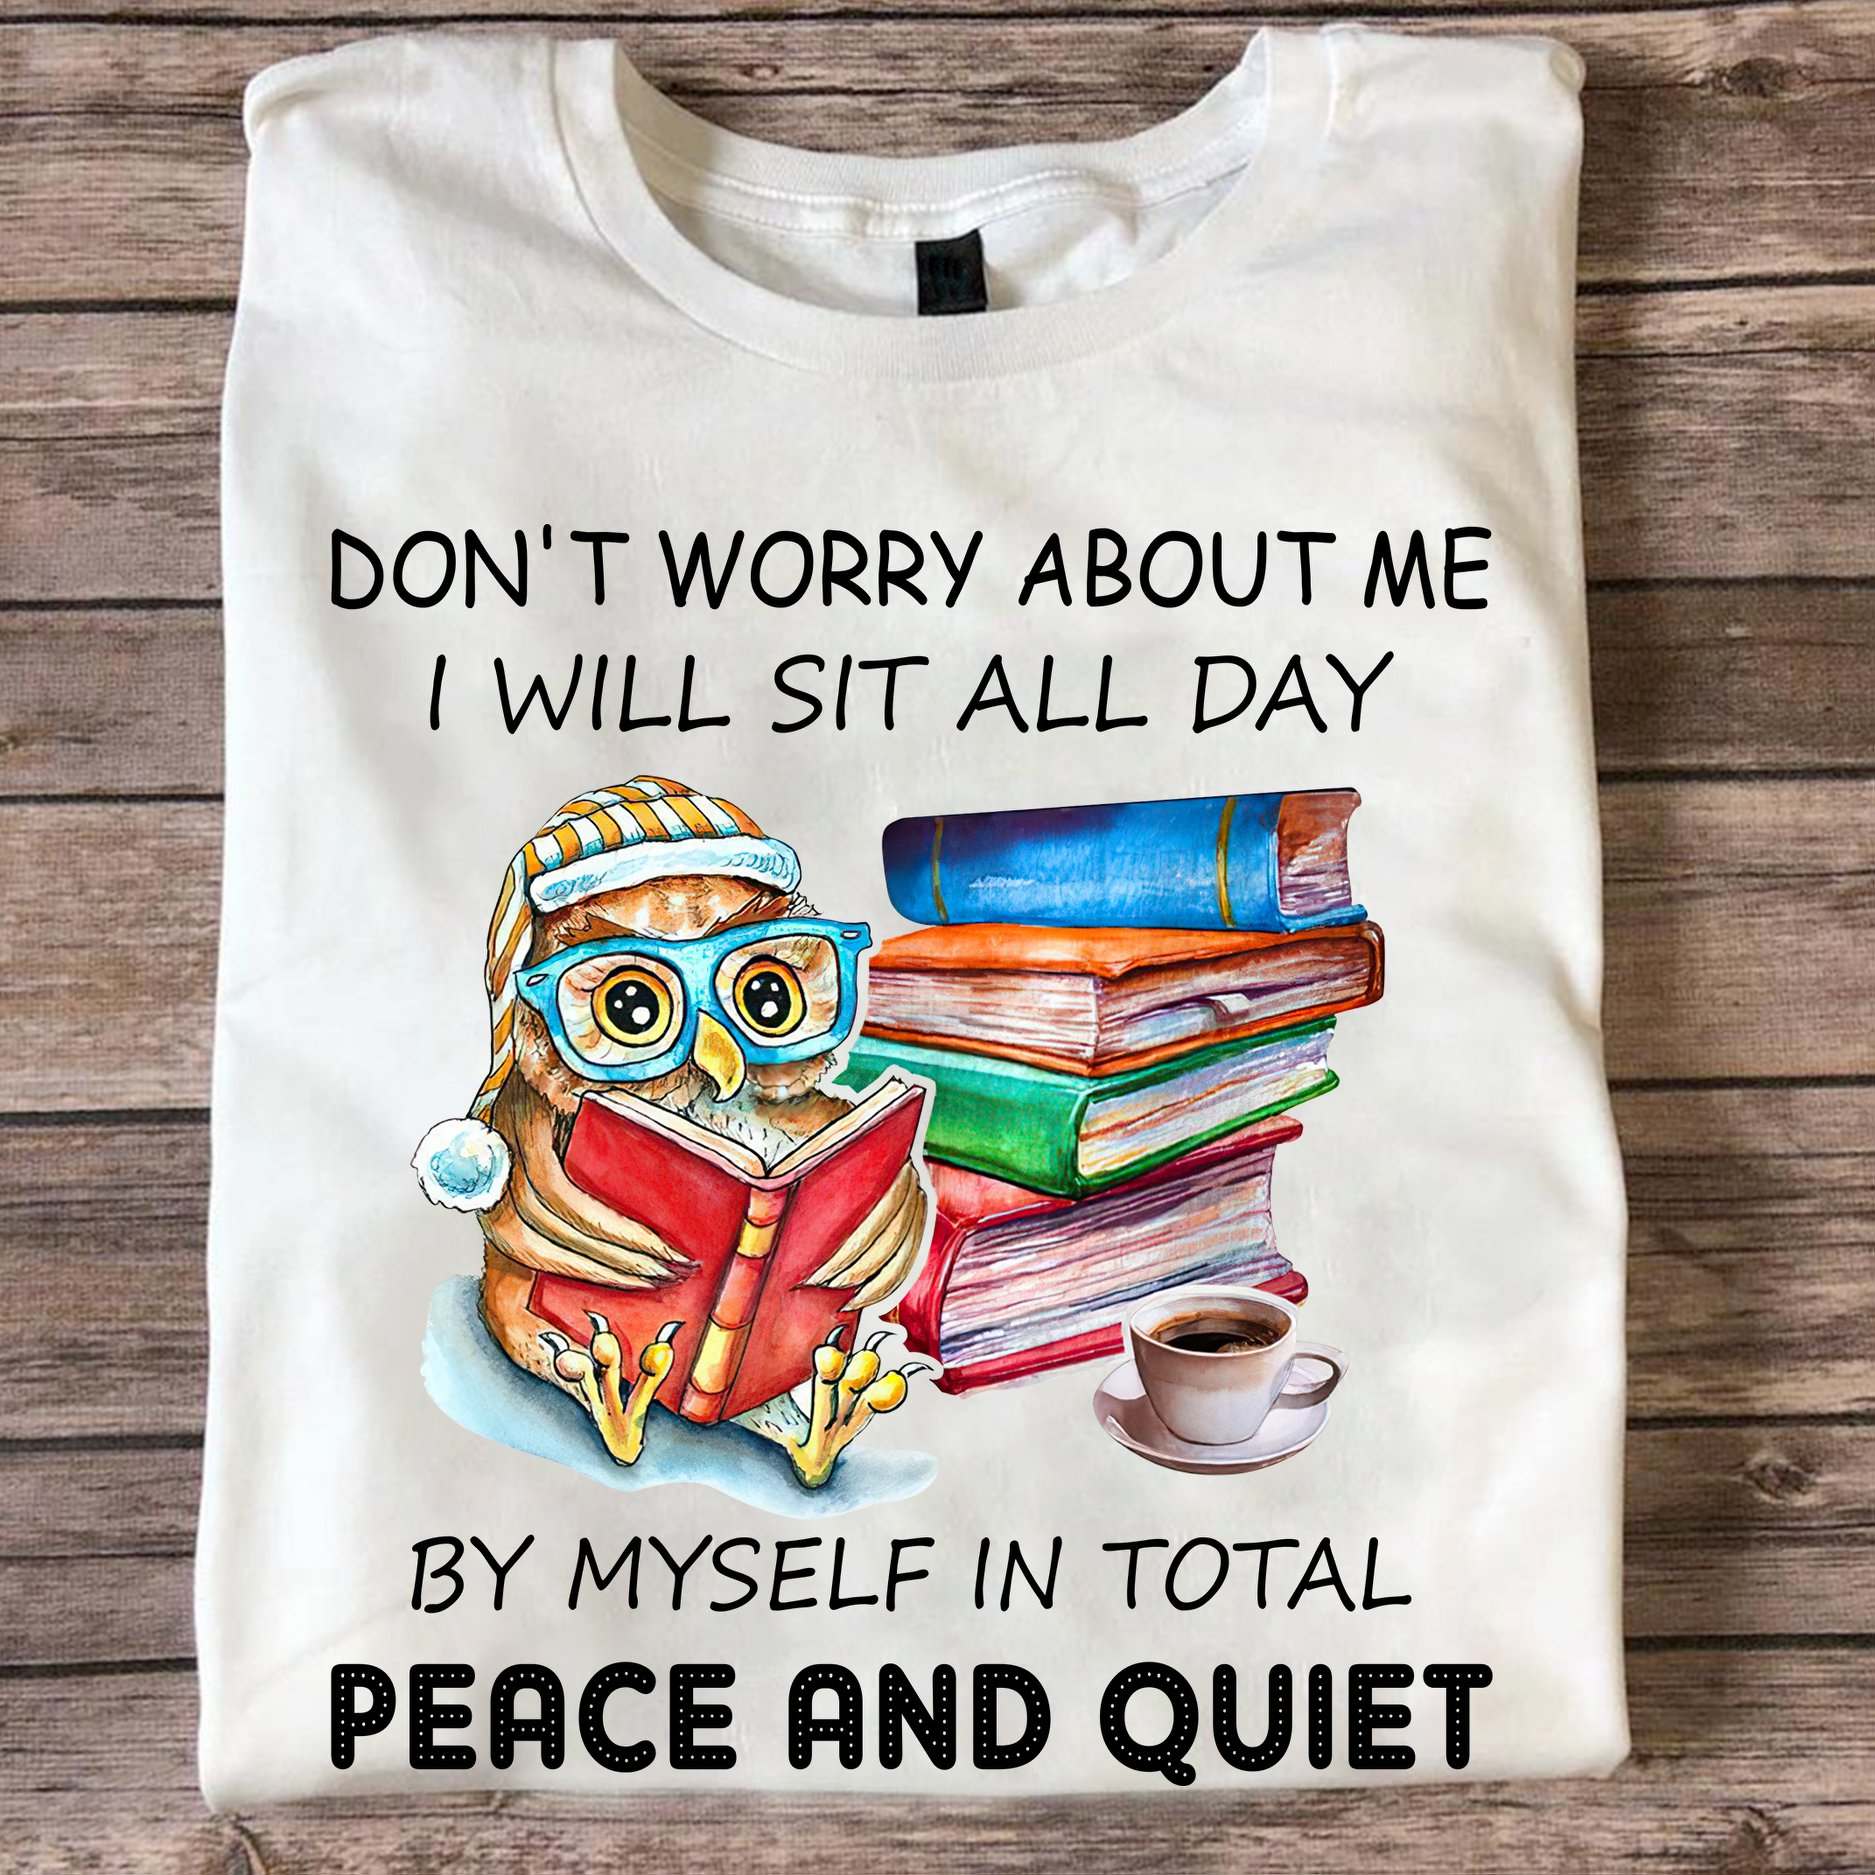 Don't worry about me I will sit all day by myself in total peace and quiet - Owl reading book